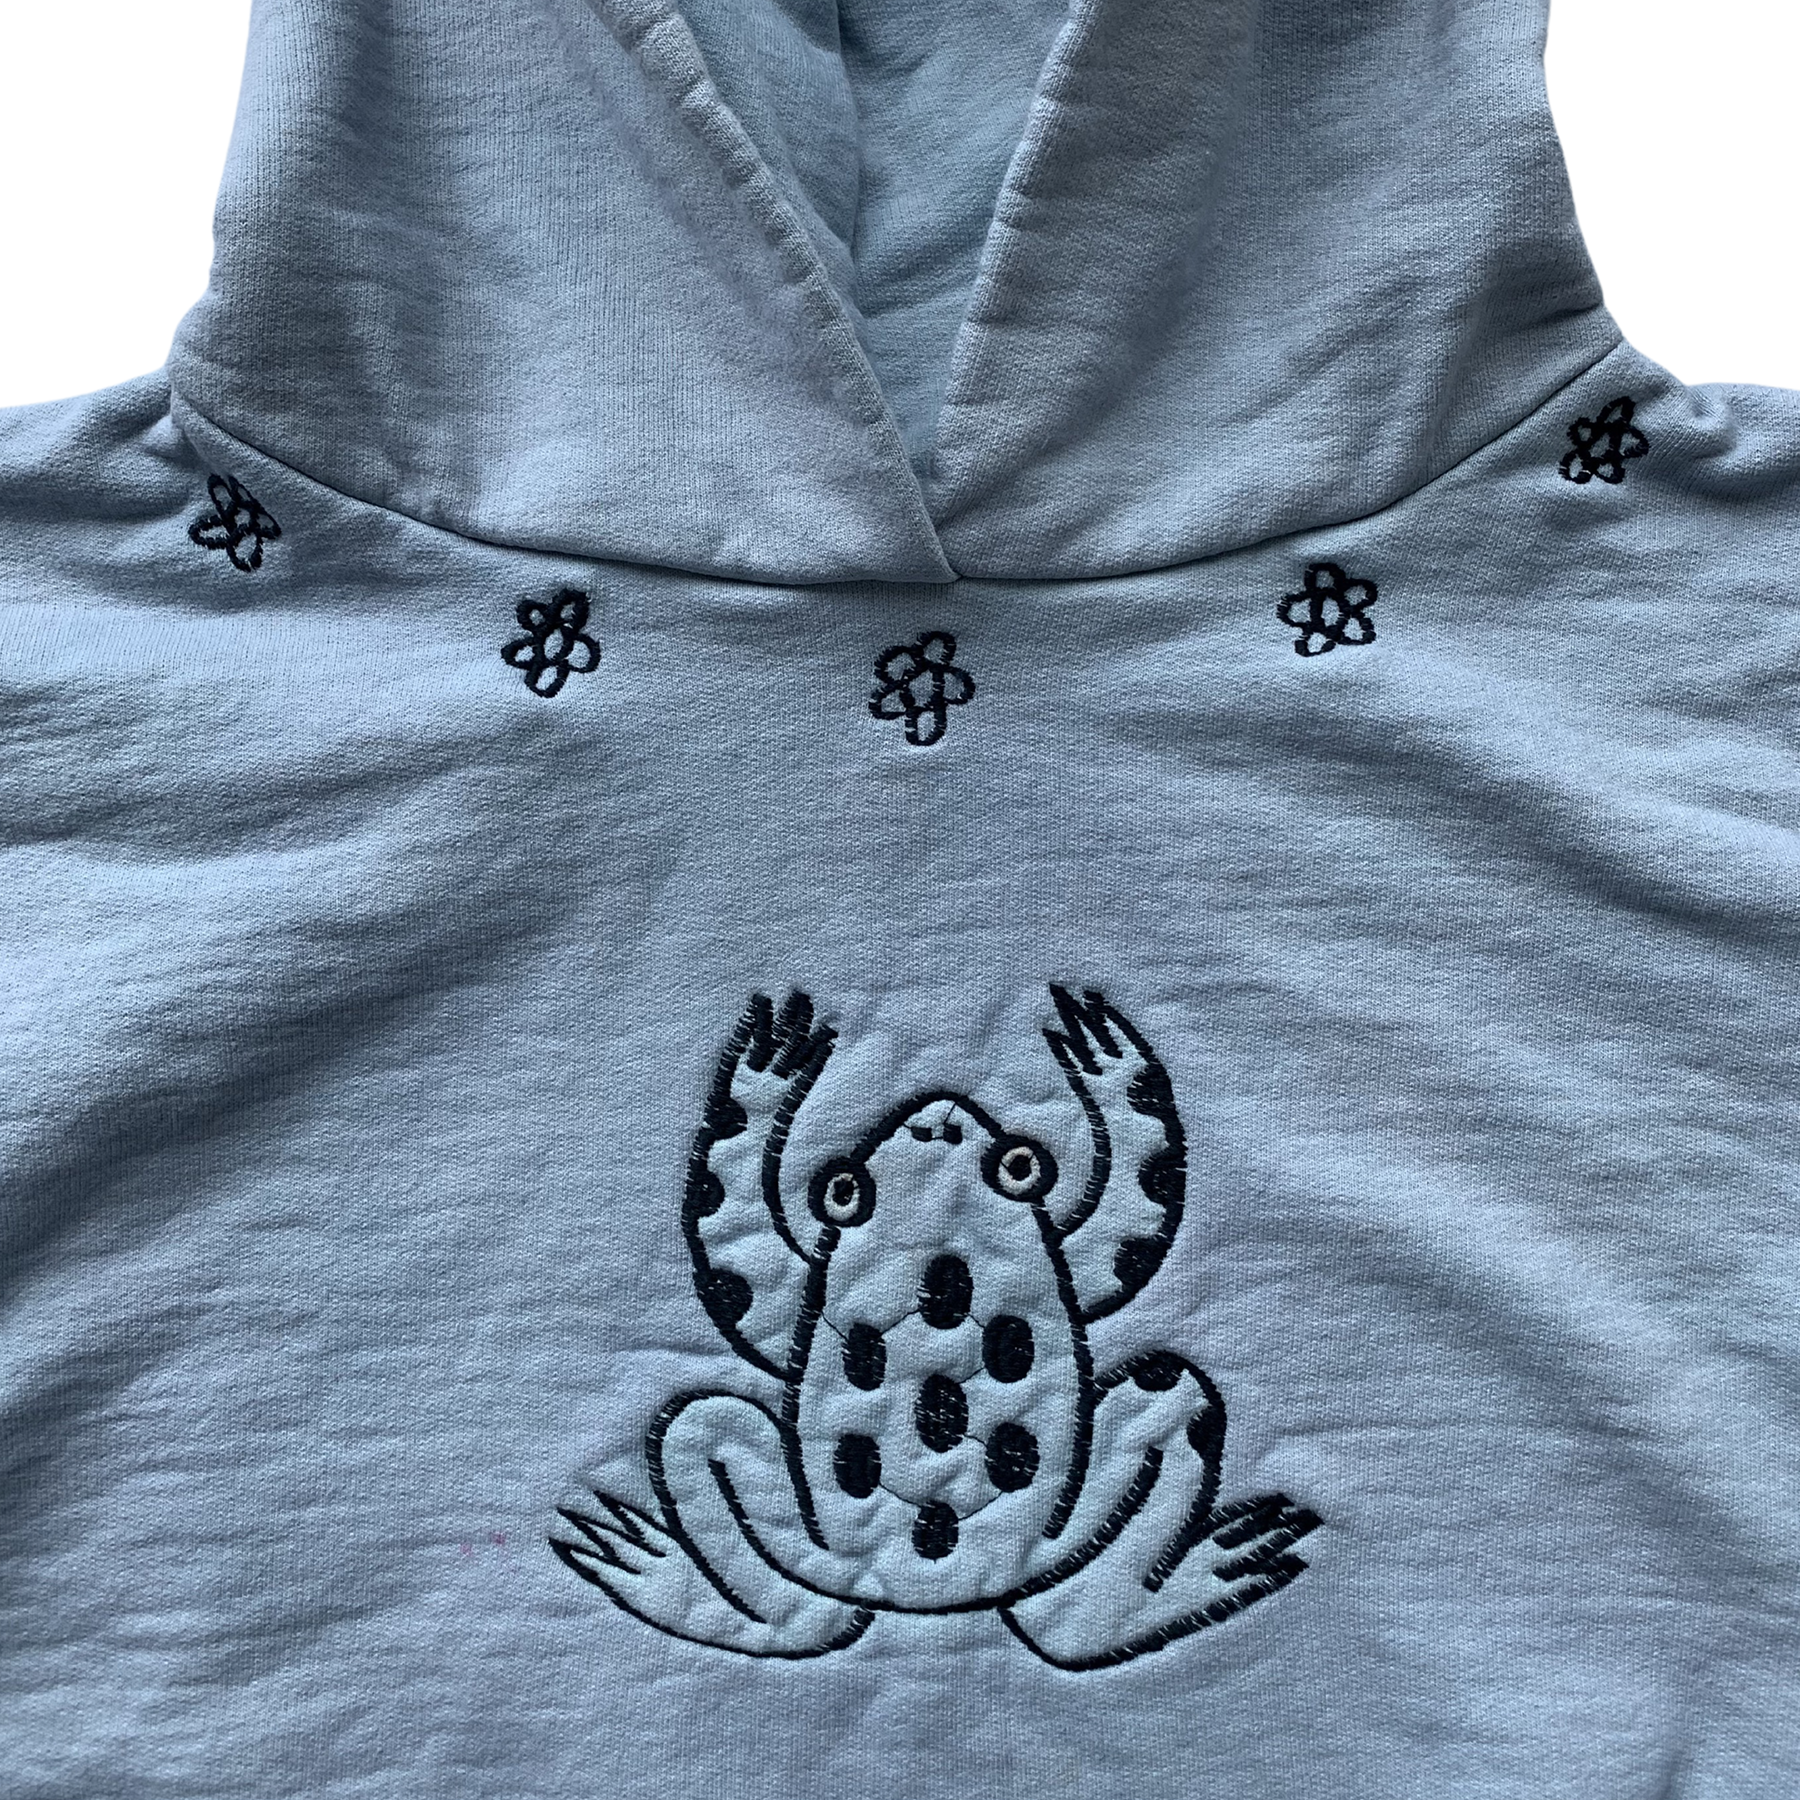 heavy fleece hoodie- organic usa cotton - garment dyed and embroidered - M SHORT